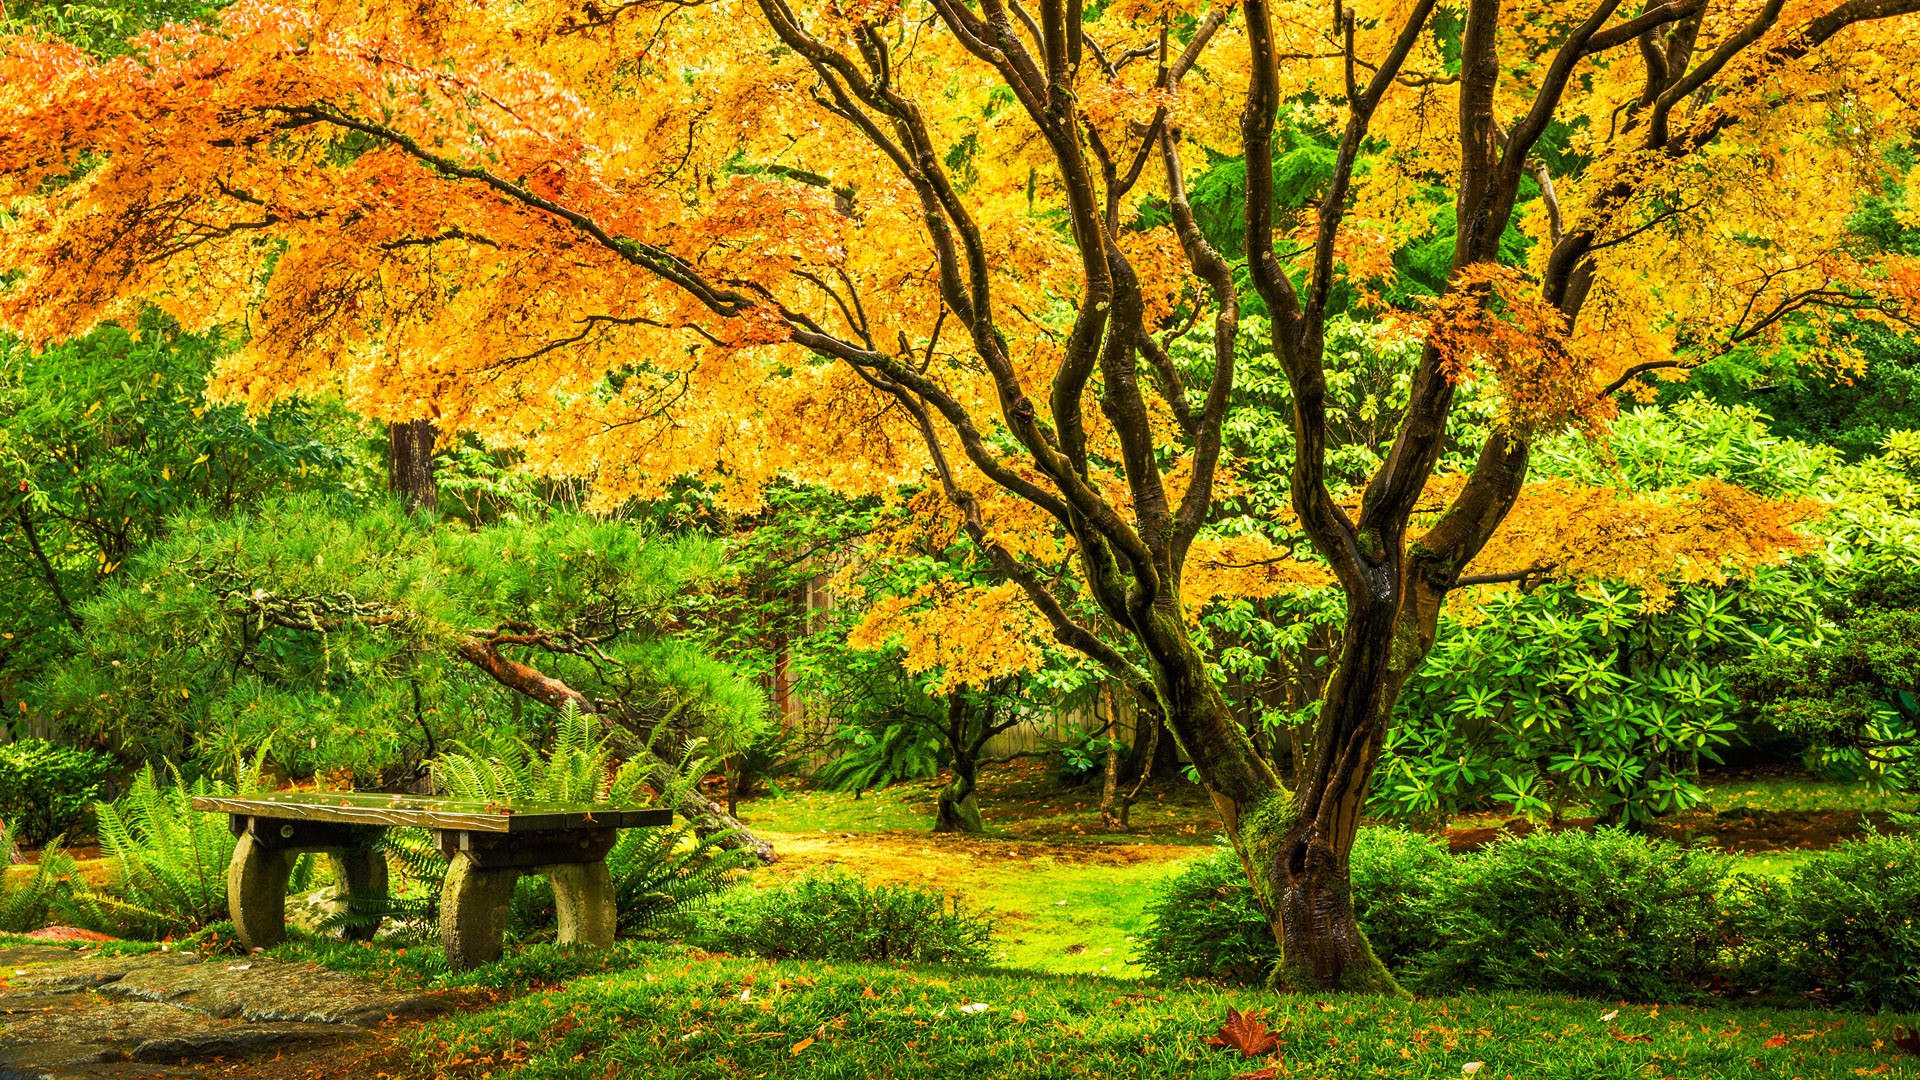 General 1920x1080 nature trees grass plants bench fall Japanese maple Washington (state) USA